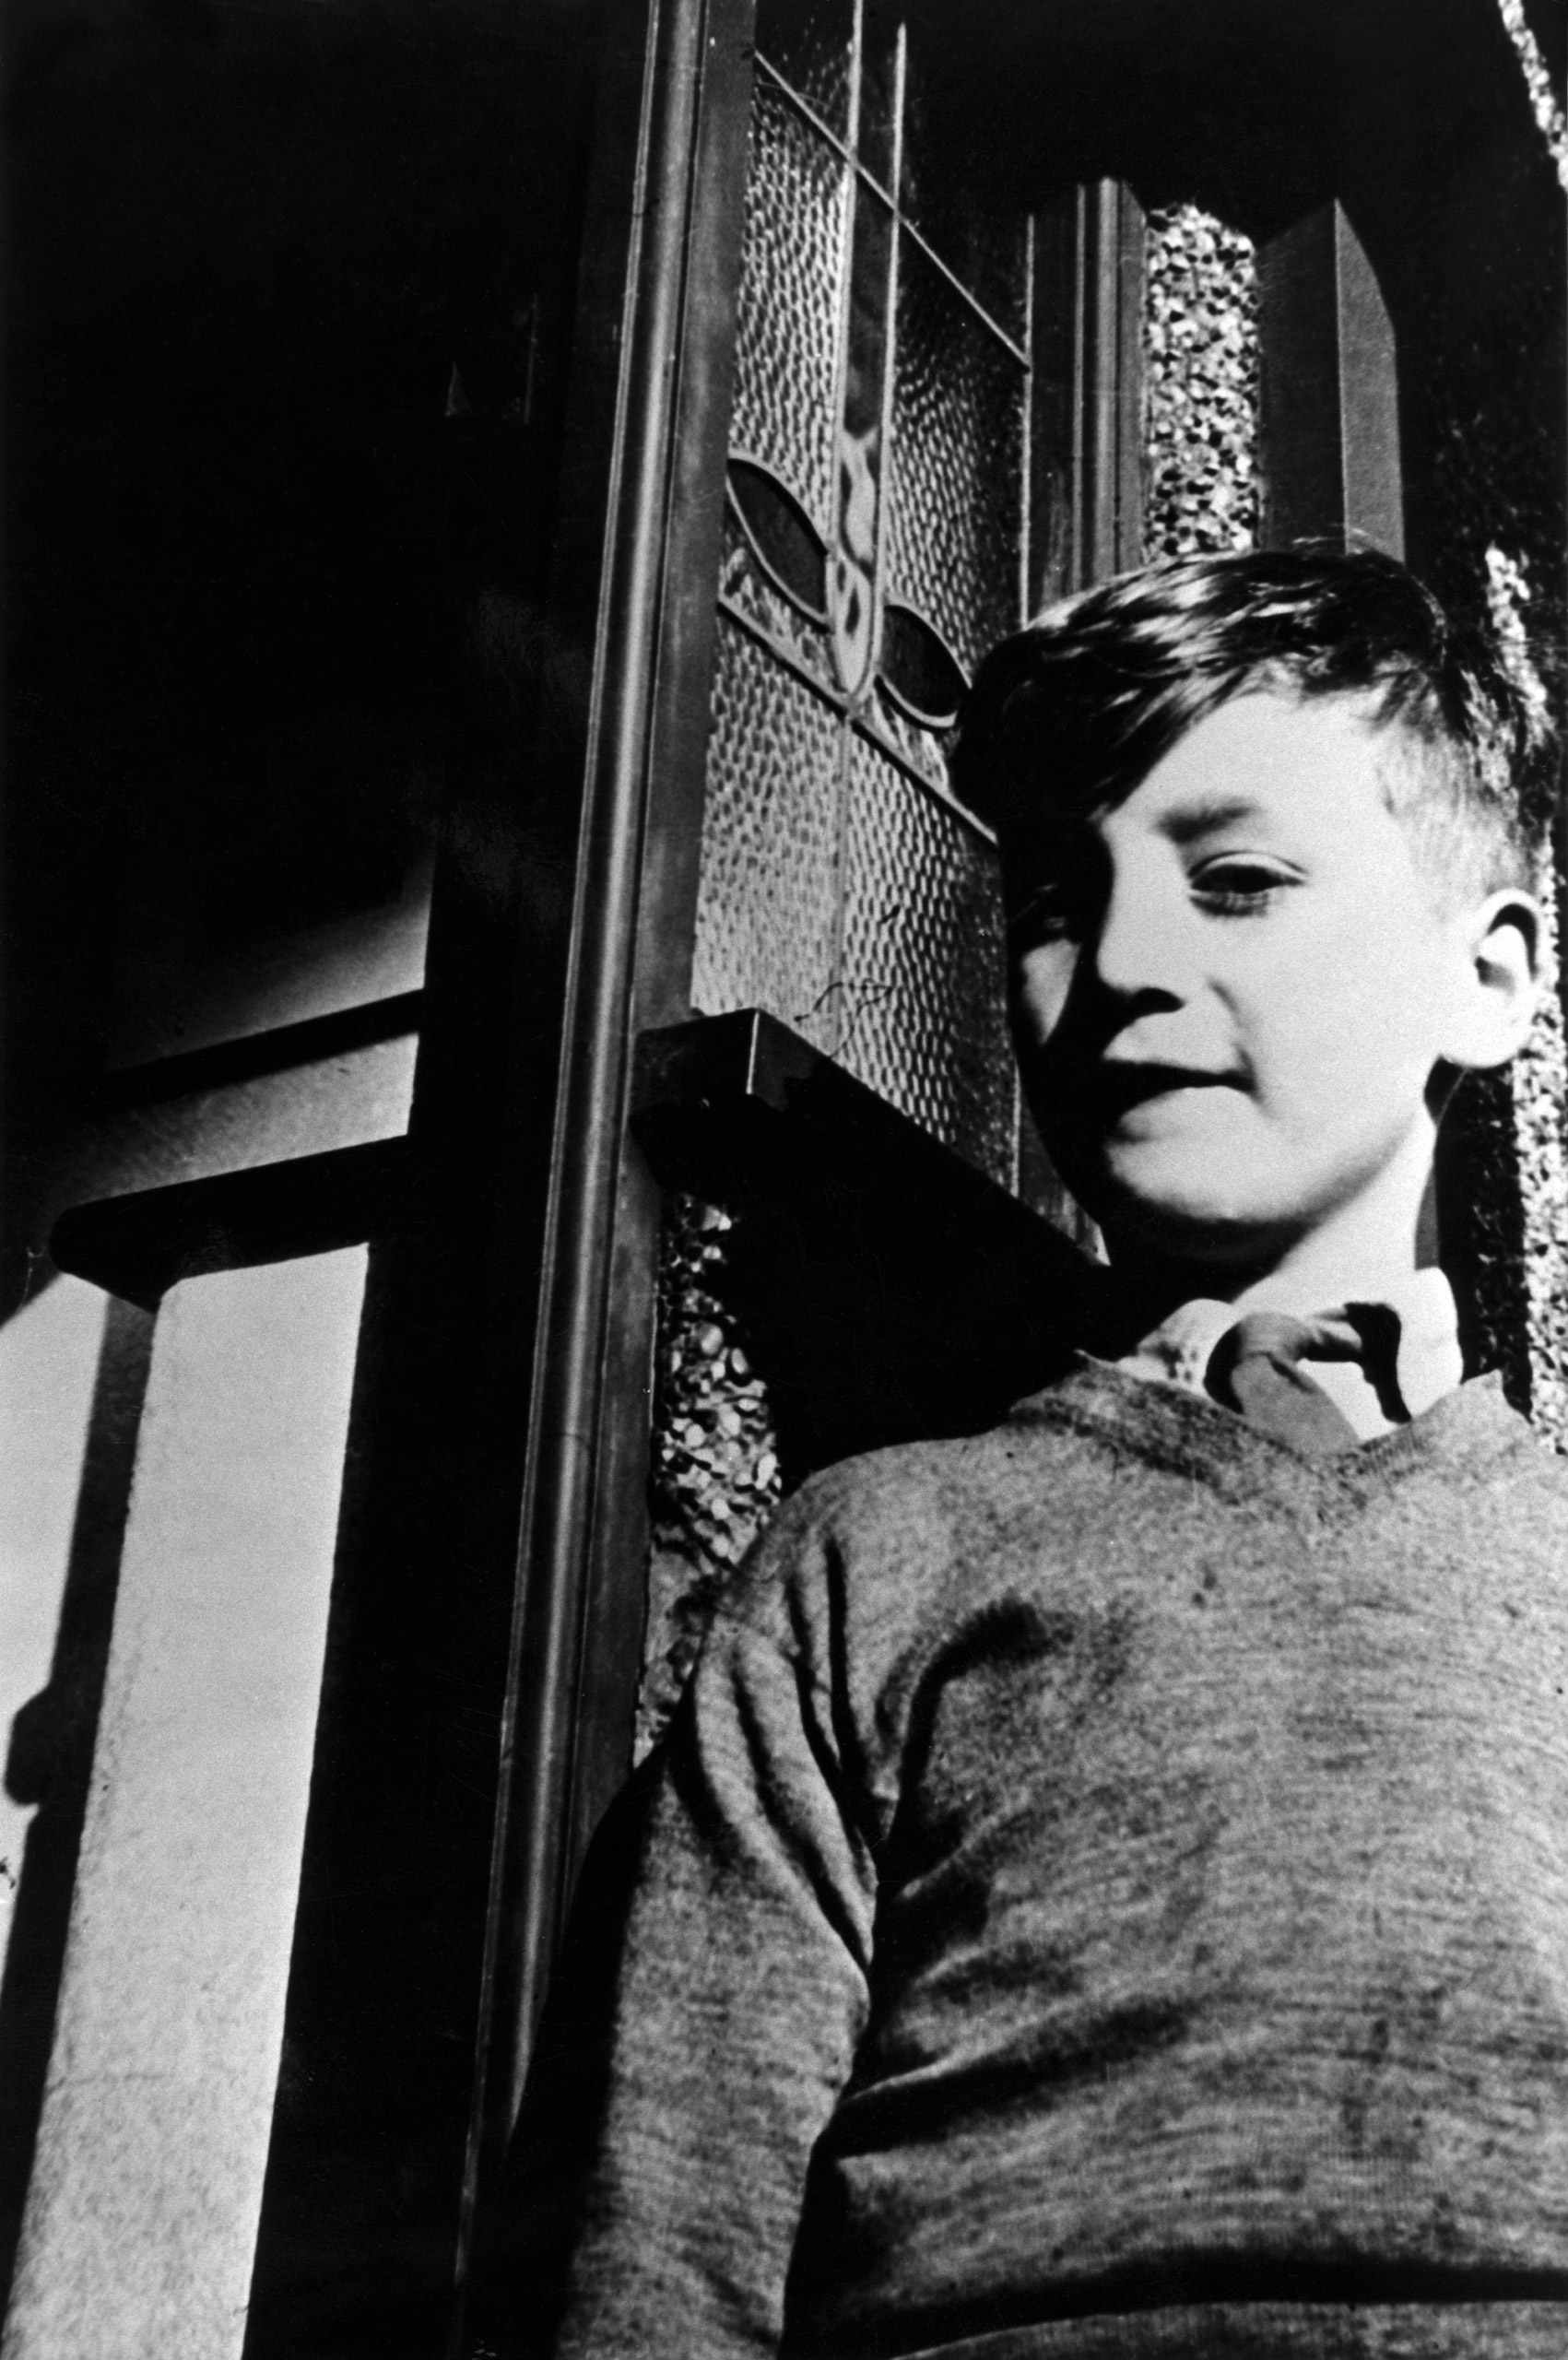 John Lennon at home in Liverpool during his schooldays, circa 1950.